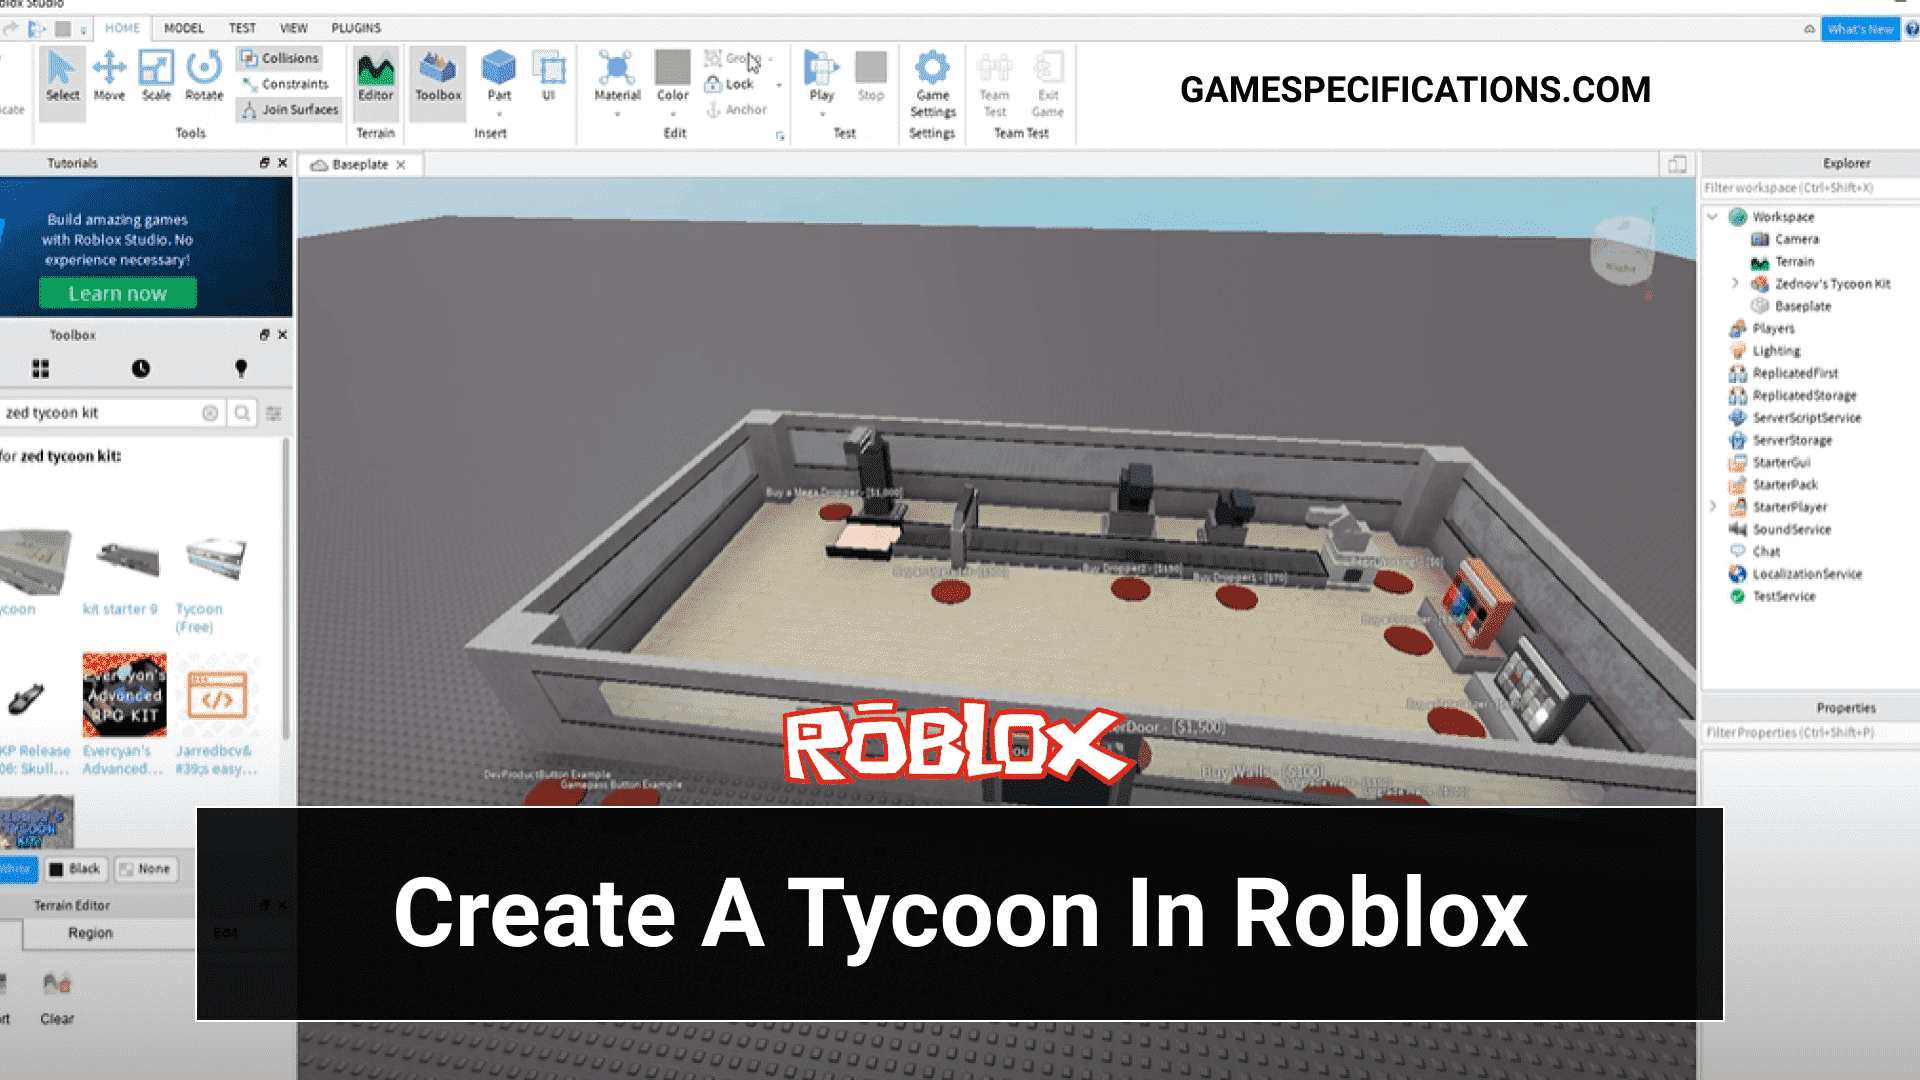 A Complete Guide On How To Make A Tycoon On Roblox Game Specifications - roblox fortnite building system